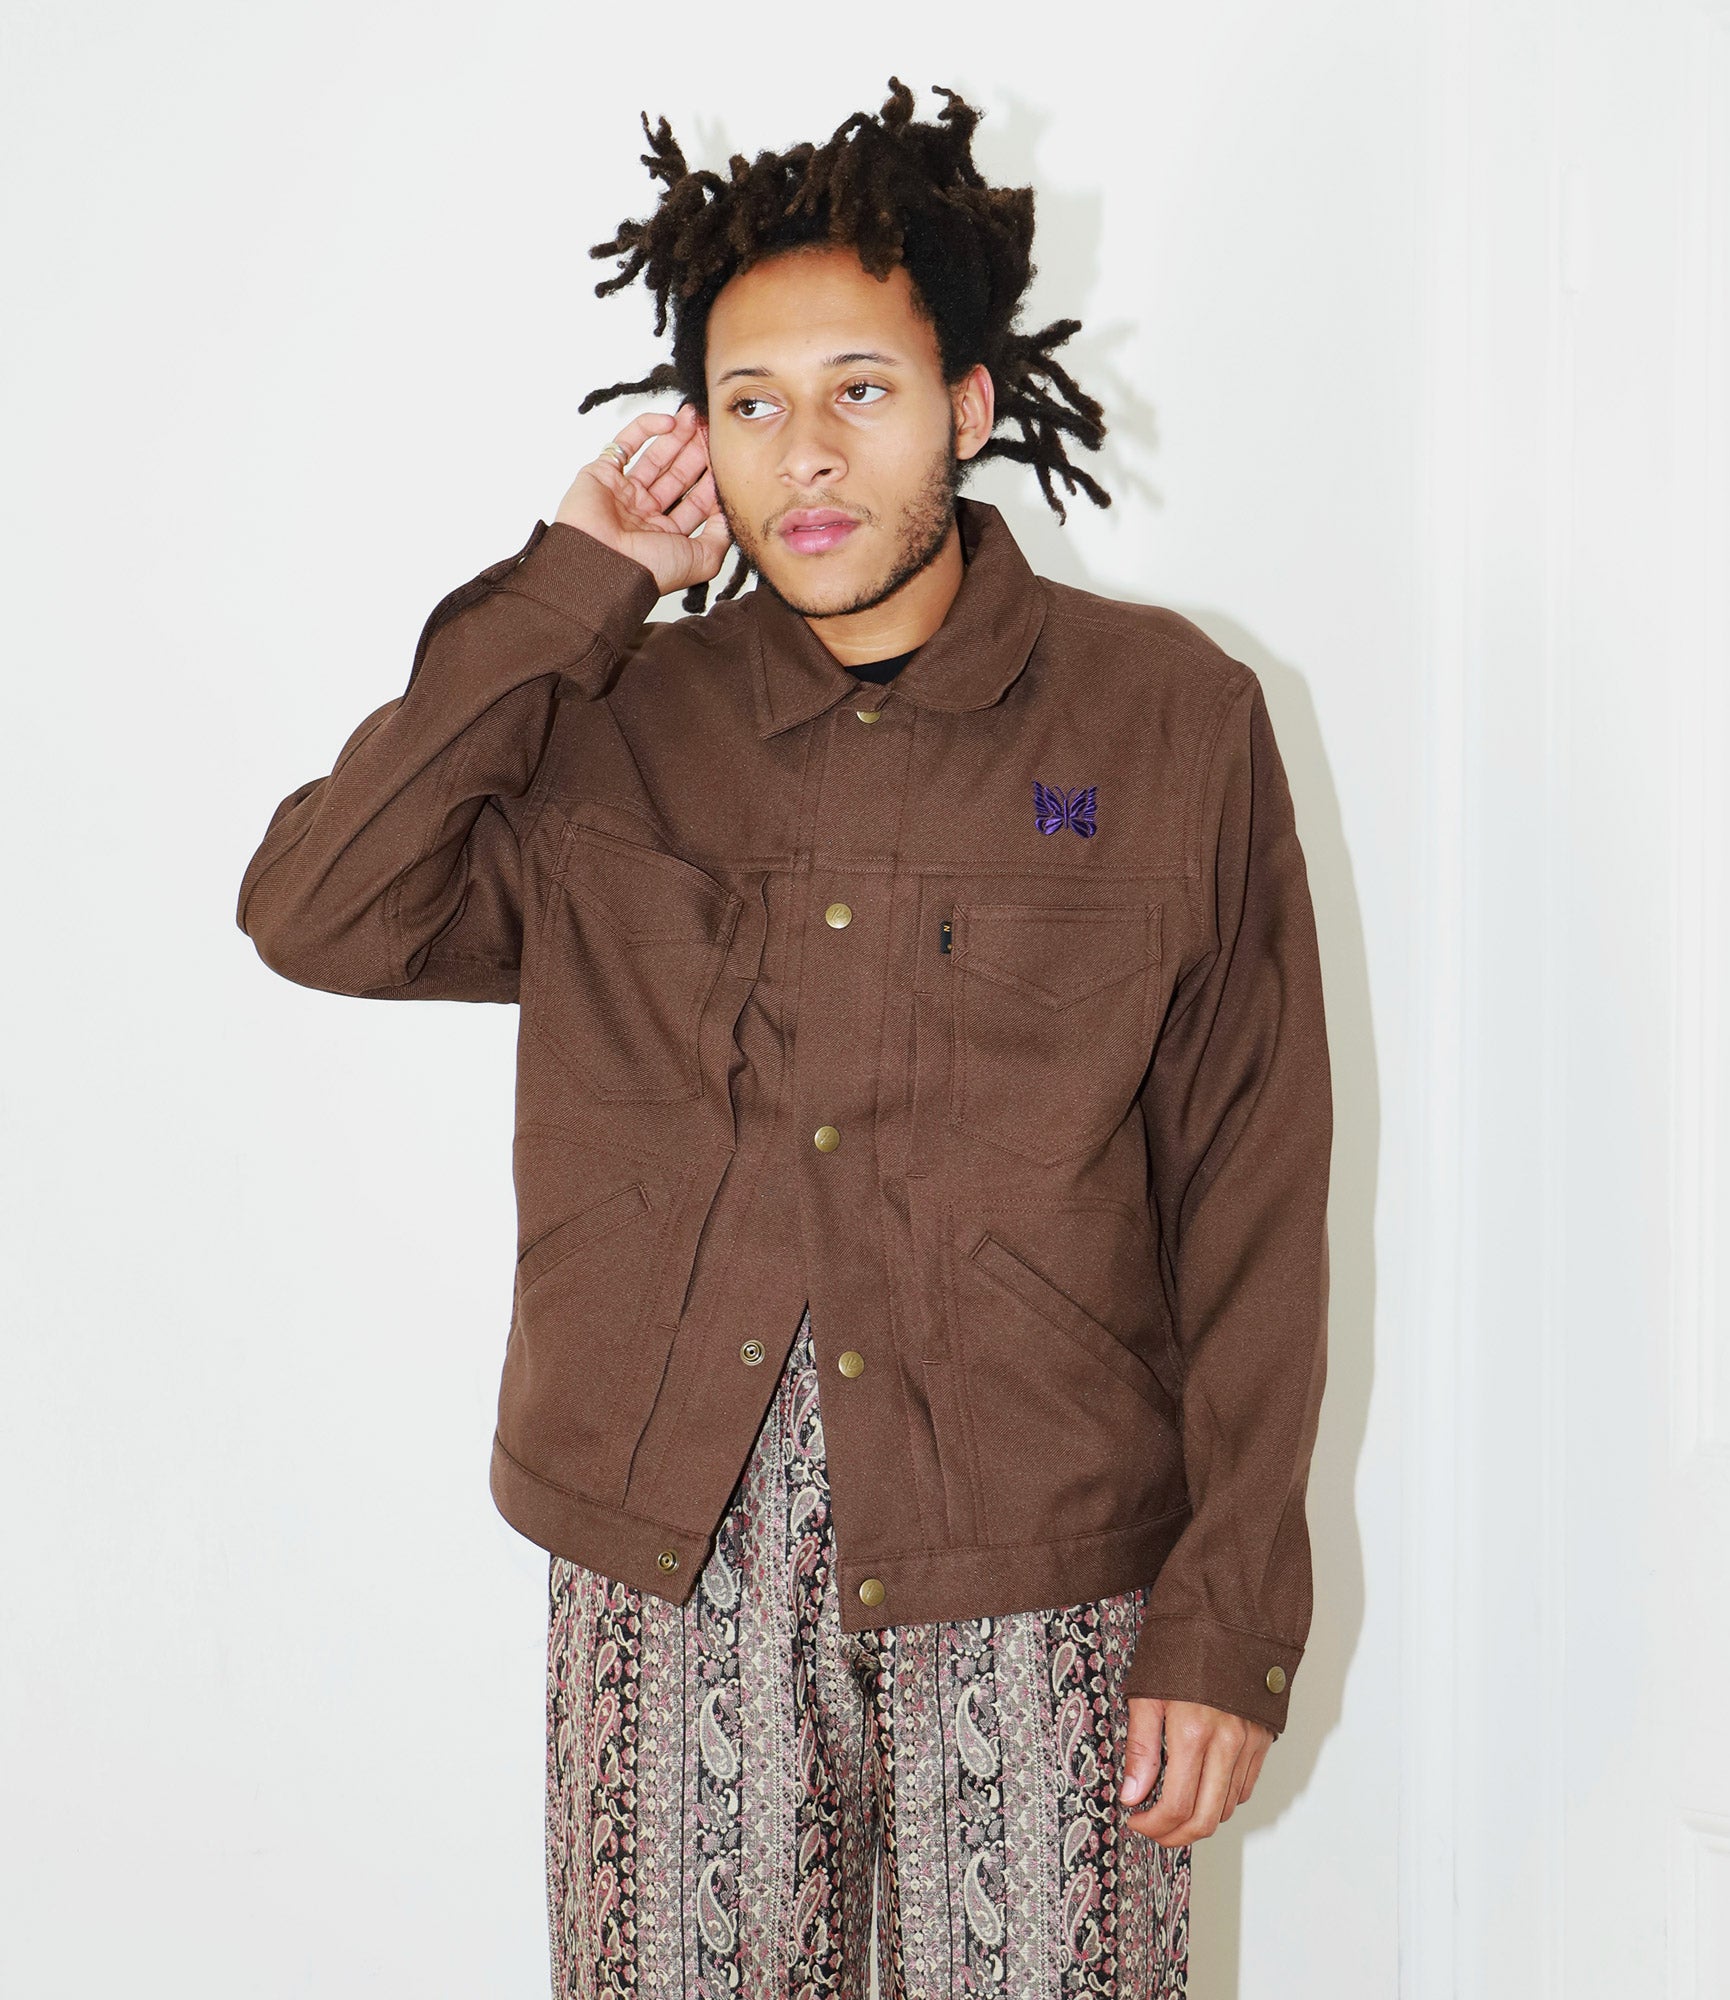 Needles Penny Jean Jacket - Poly Twill - Brown